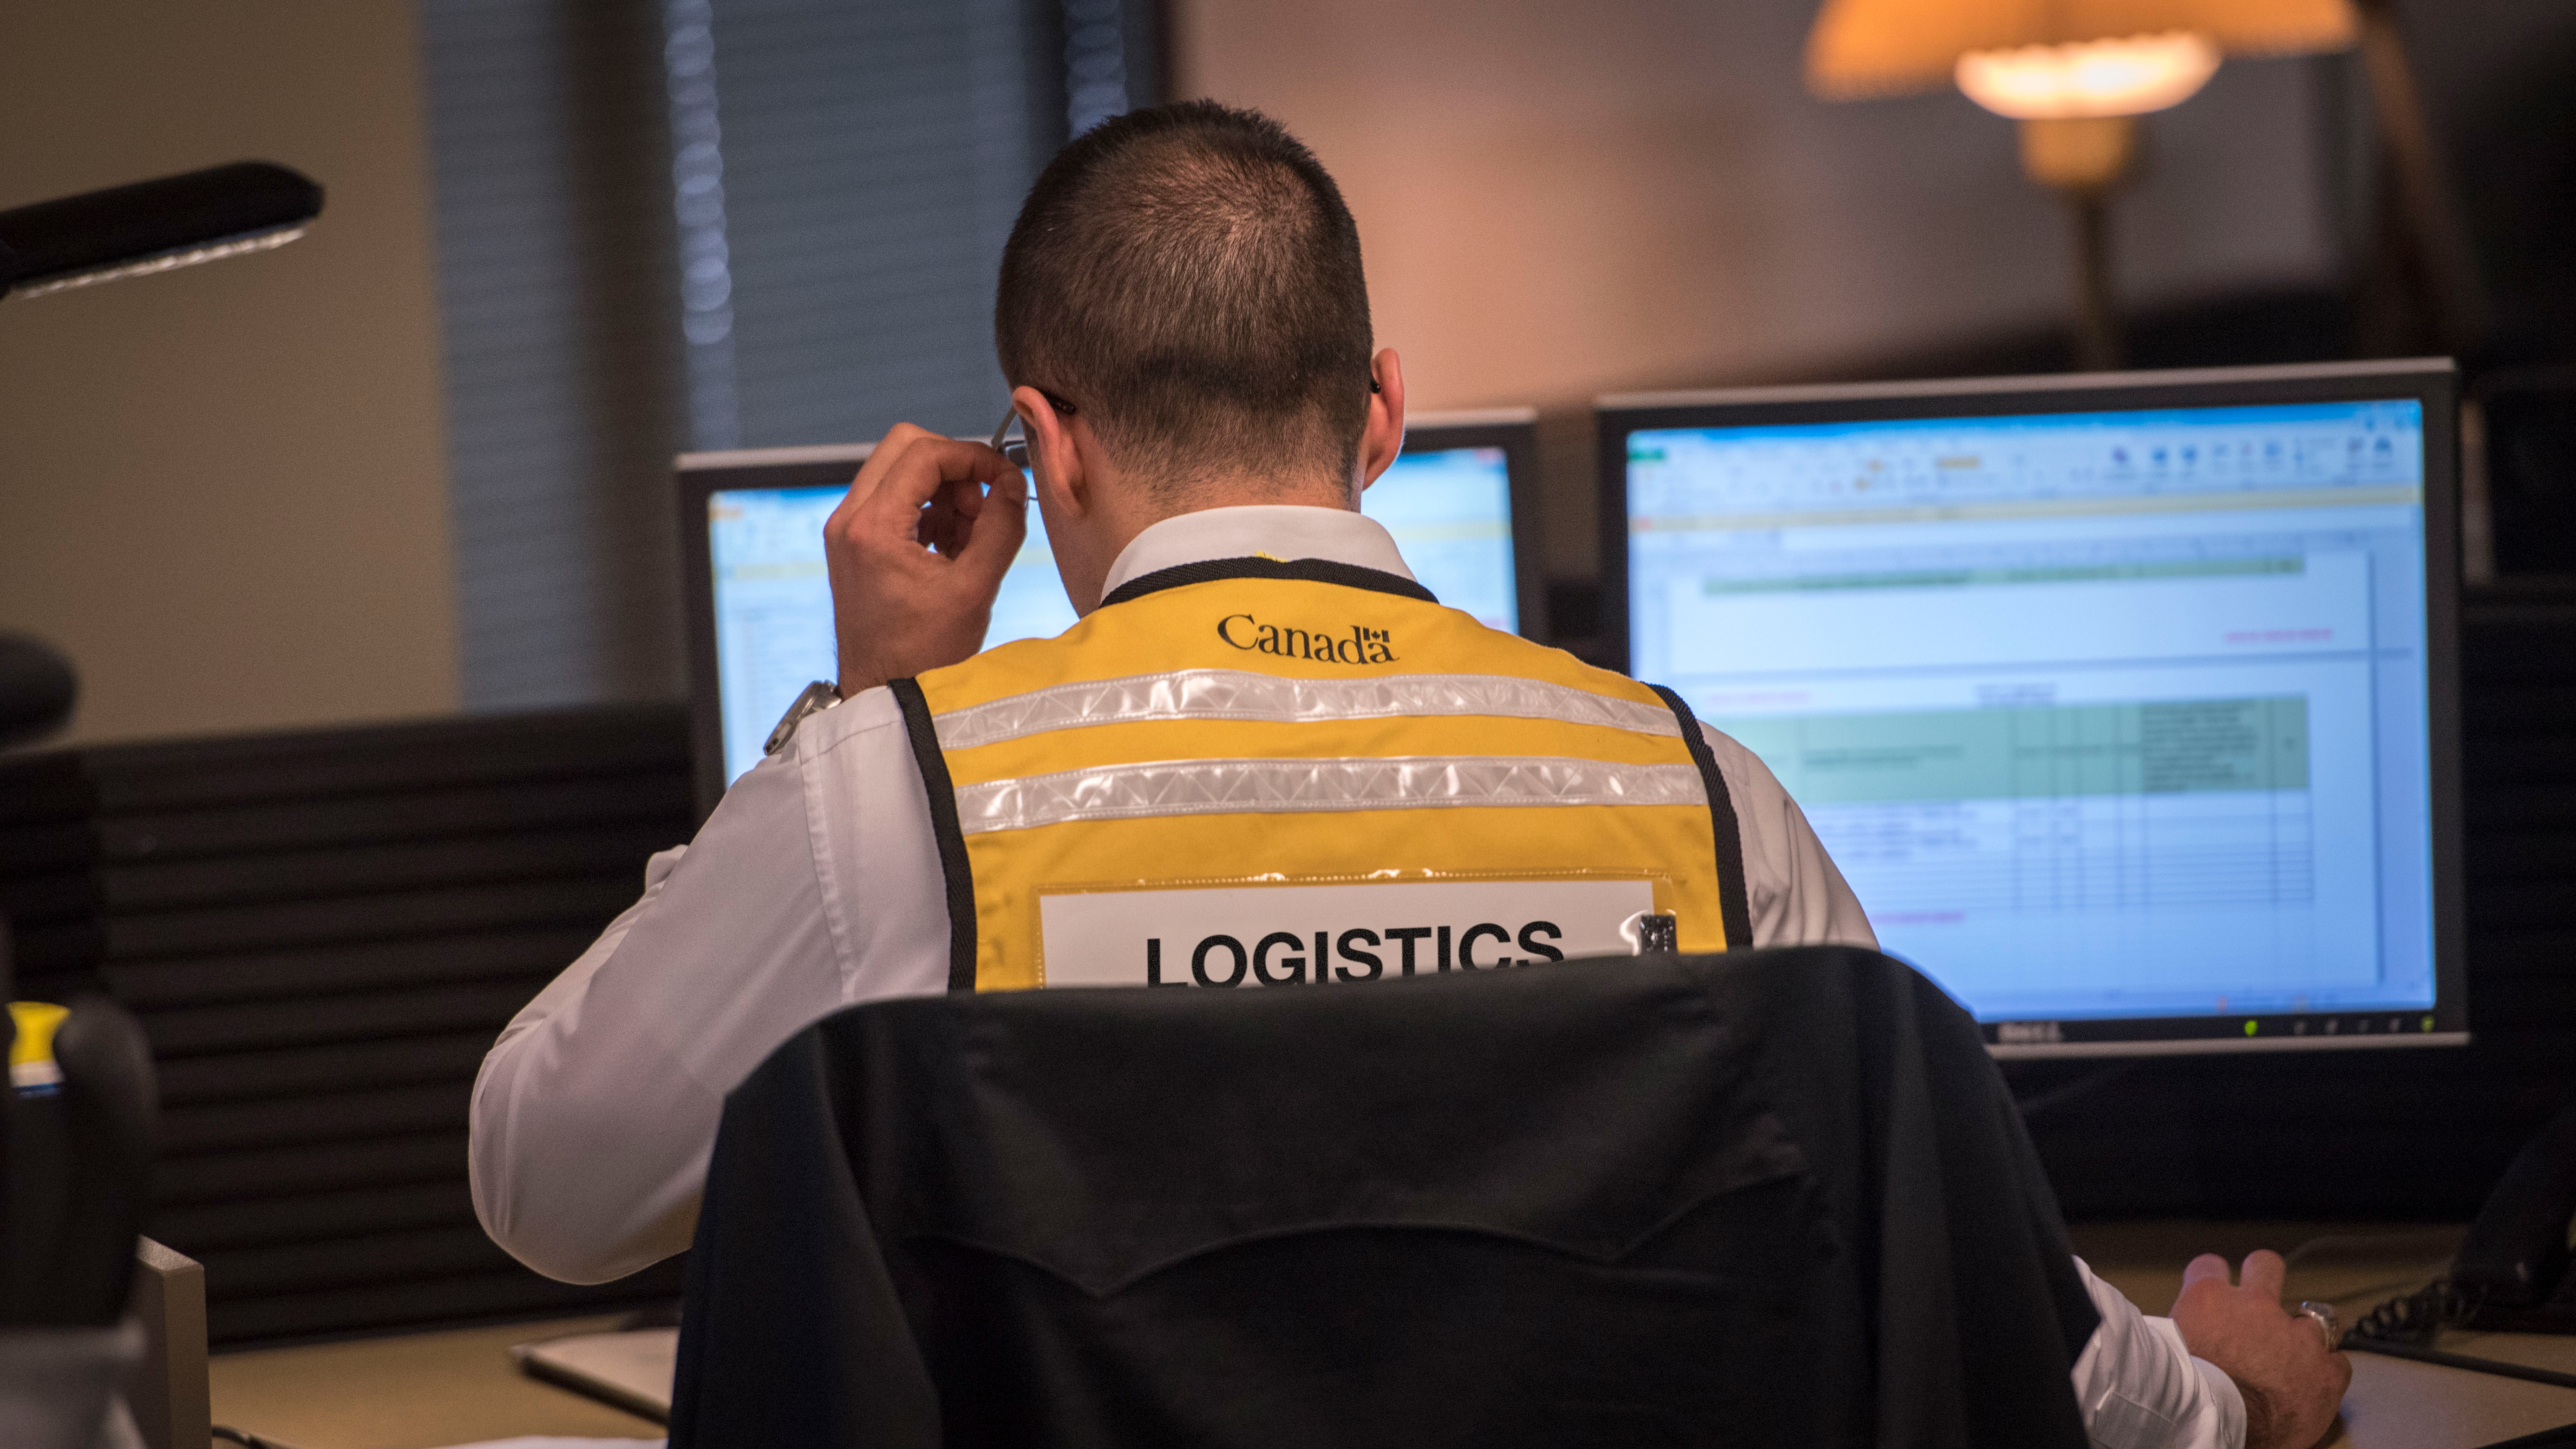 A public servant wearing a yellow vest that says “Logistics” on the back sits in front of a computer in the Government Operations Centre